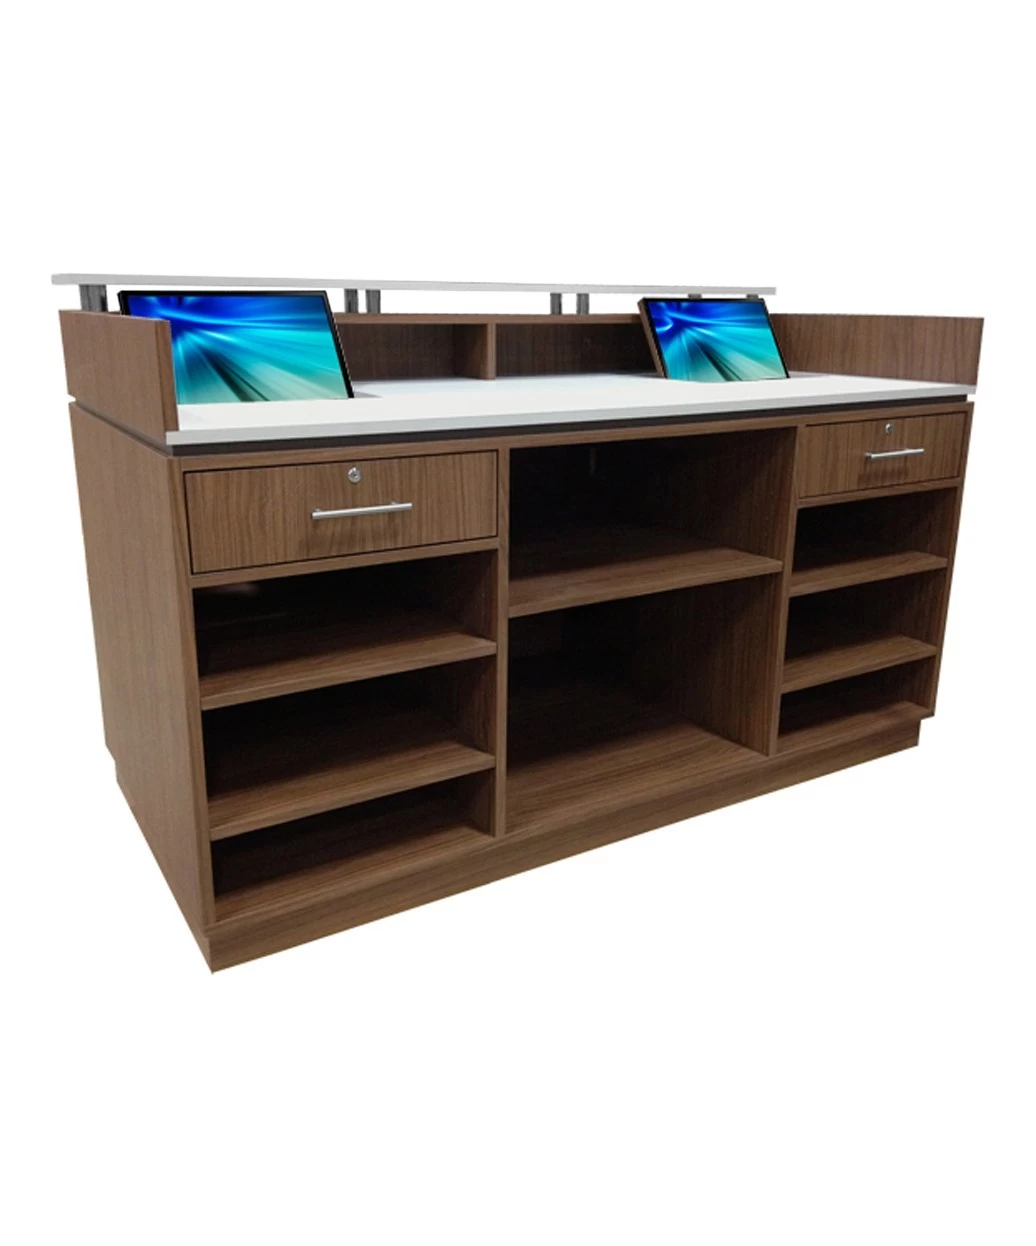 Salon Reception Desk Wood Finishes with Drawers Salon Waiting Area Furniture DS-W1846